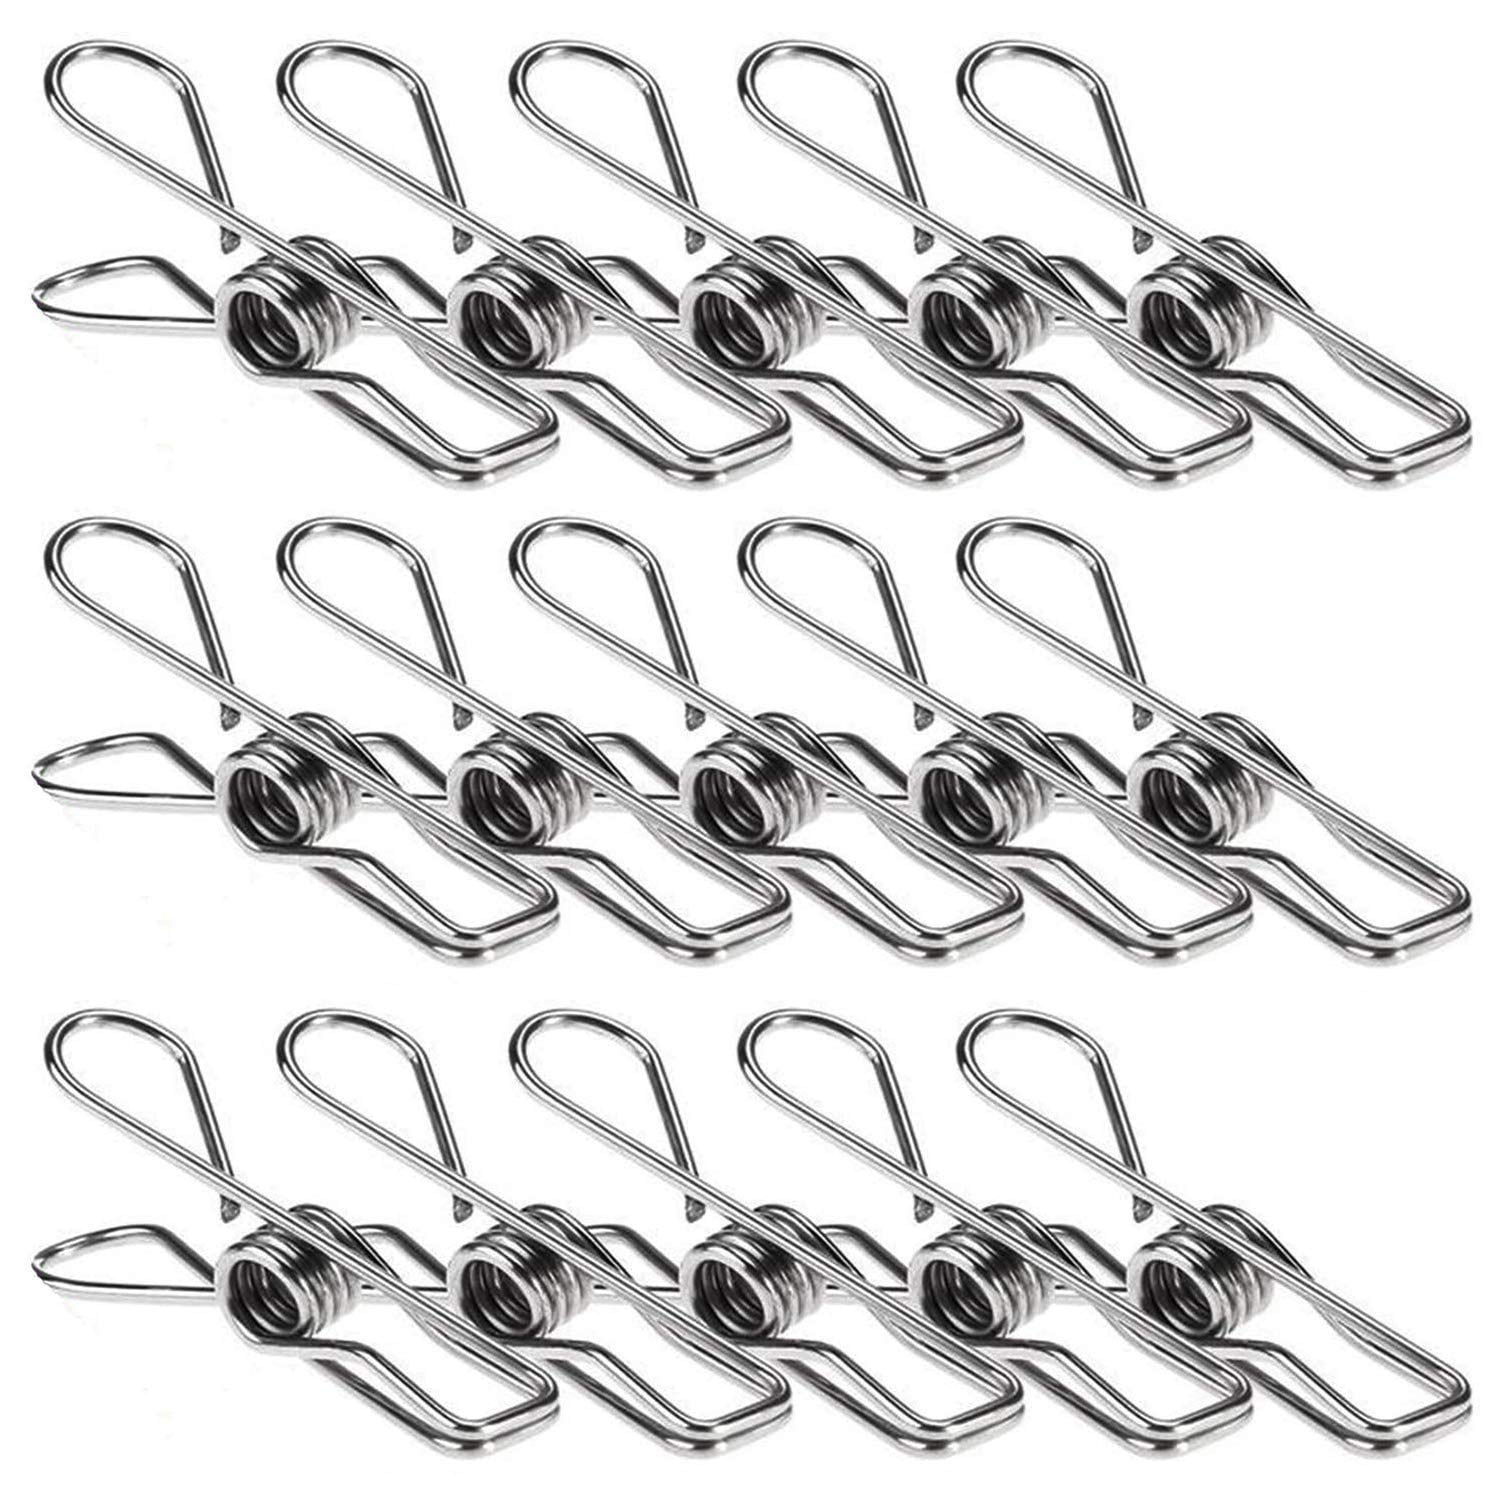 20 Stainless Steel Clothes Pegs Hanging Clip Pins Windproof Eco-friendly Clamp 